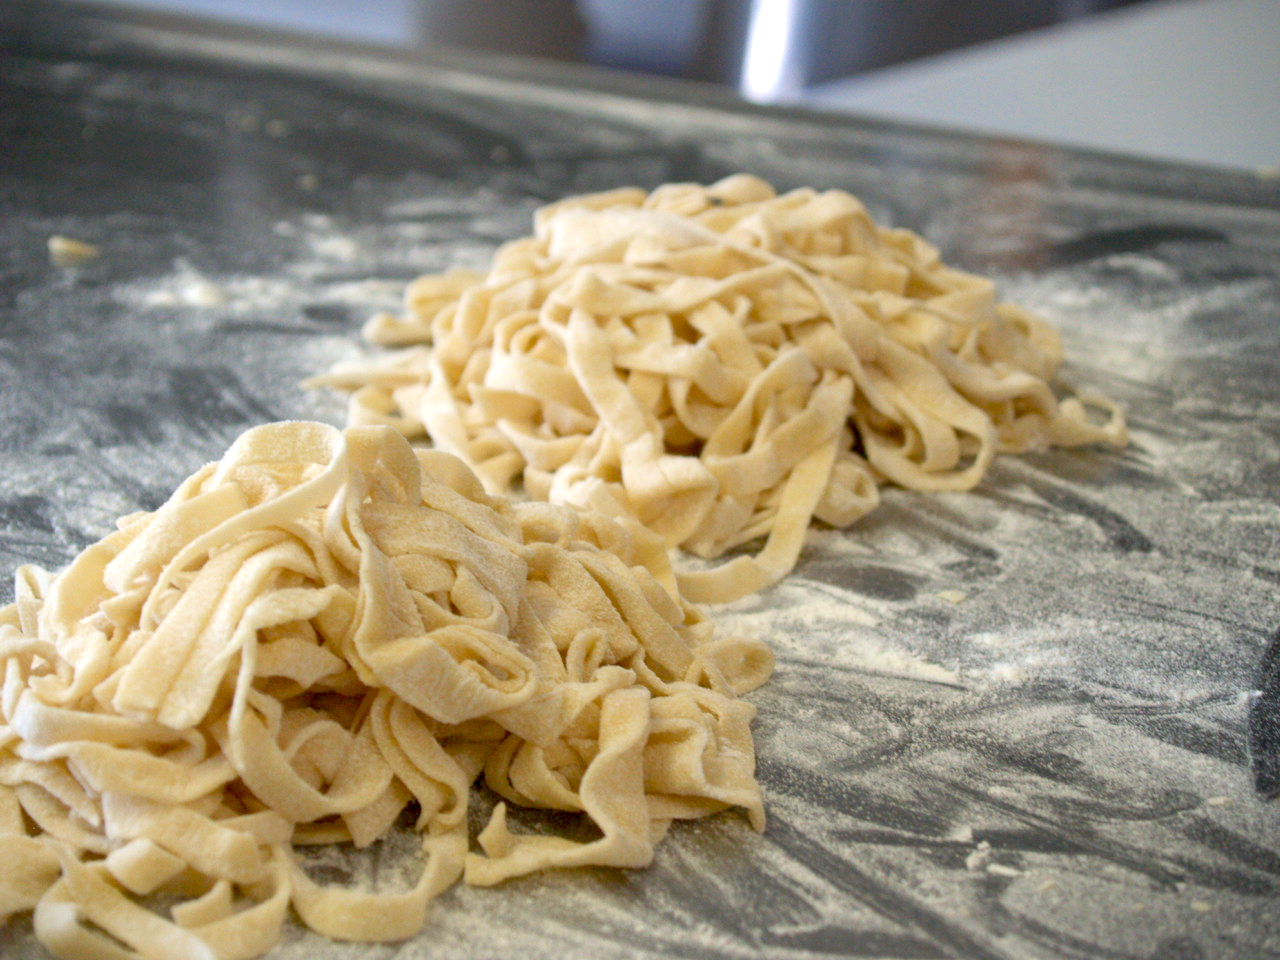 This Is How You Make Pasta From Scratch - Food Republic